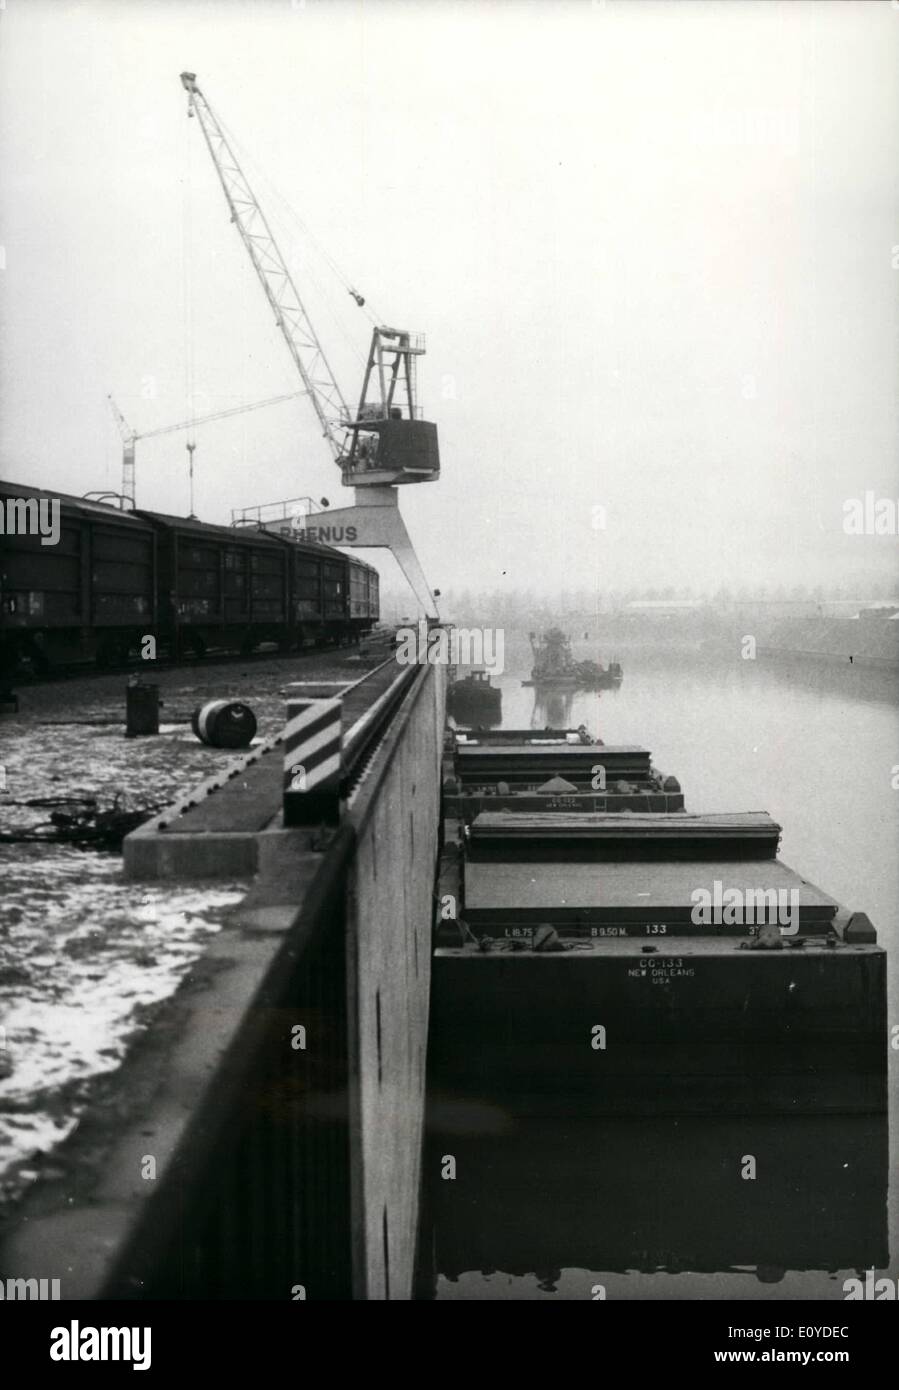 Dec. 12, 1969 - Containers floating from the Mississippi to Cologne, The town of Cologne has become the terminus of a new traffic system connecting the USA with Europe. This traffic system consists of big floating containers conveying goods from the USA to Cologne and back, without being necessary to reload them. Thus Cologne enjoys the advantages of a sea port. The first transport of paper and cellulose which is ear-marked partly for Eastern Europe has now arrived. The floating big containers are harboring on a jetty-wall like ships and 18.75 ms. long,9.30. wide, and 4 ms. high Stock Photo